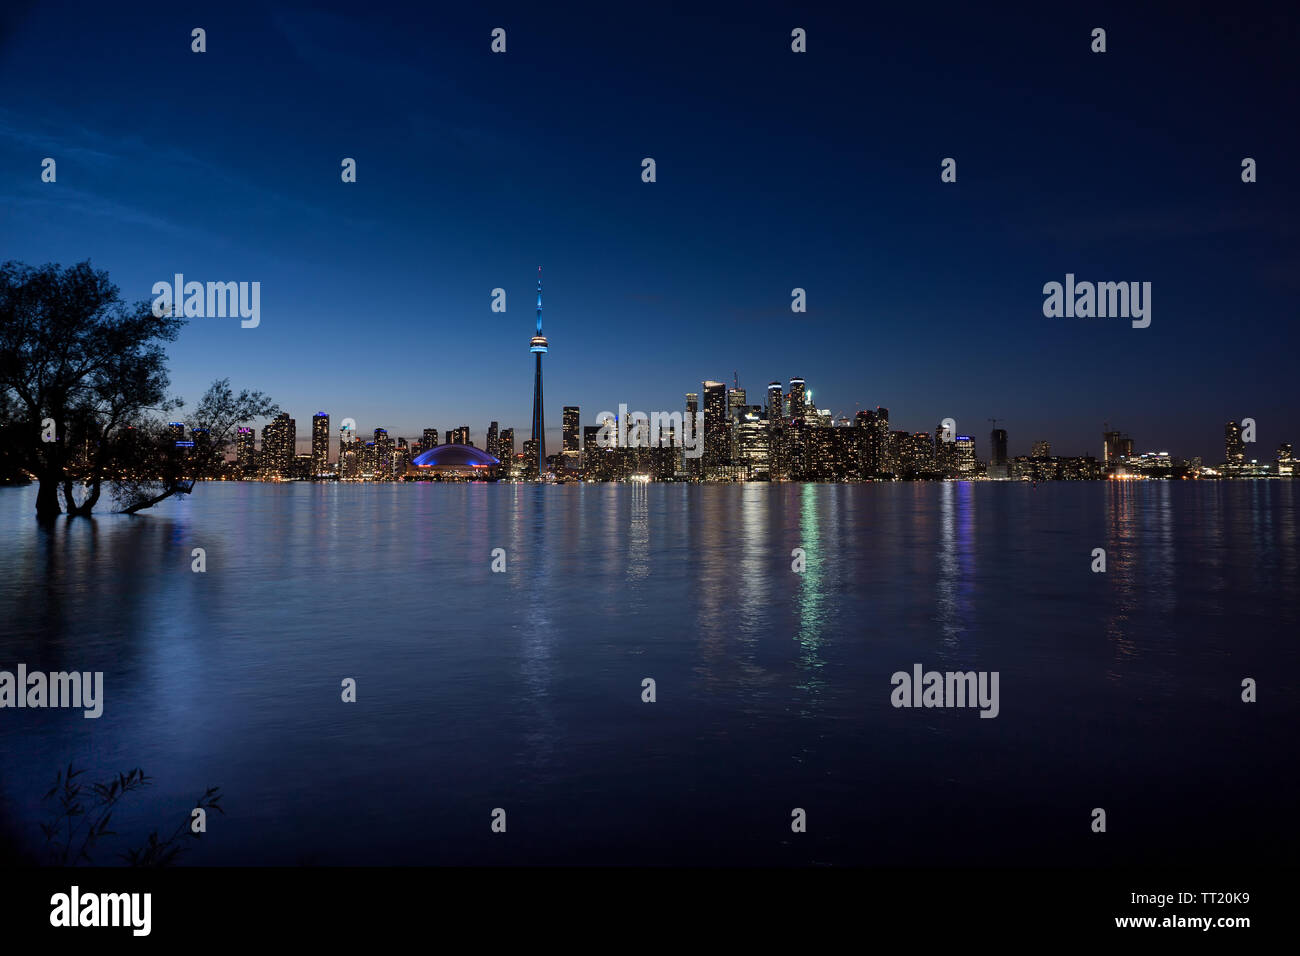 Canada, Toronto, skyline with the CN Tower, view of flooded island in the blue hour, water reflections, June 2019 Stock Photo